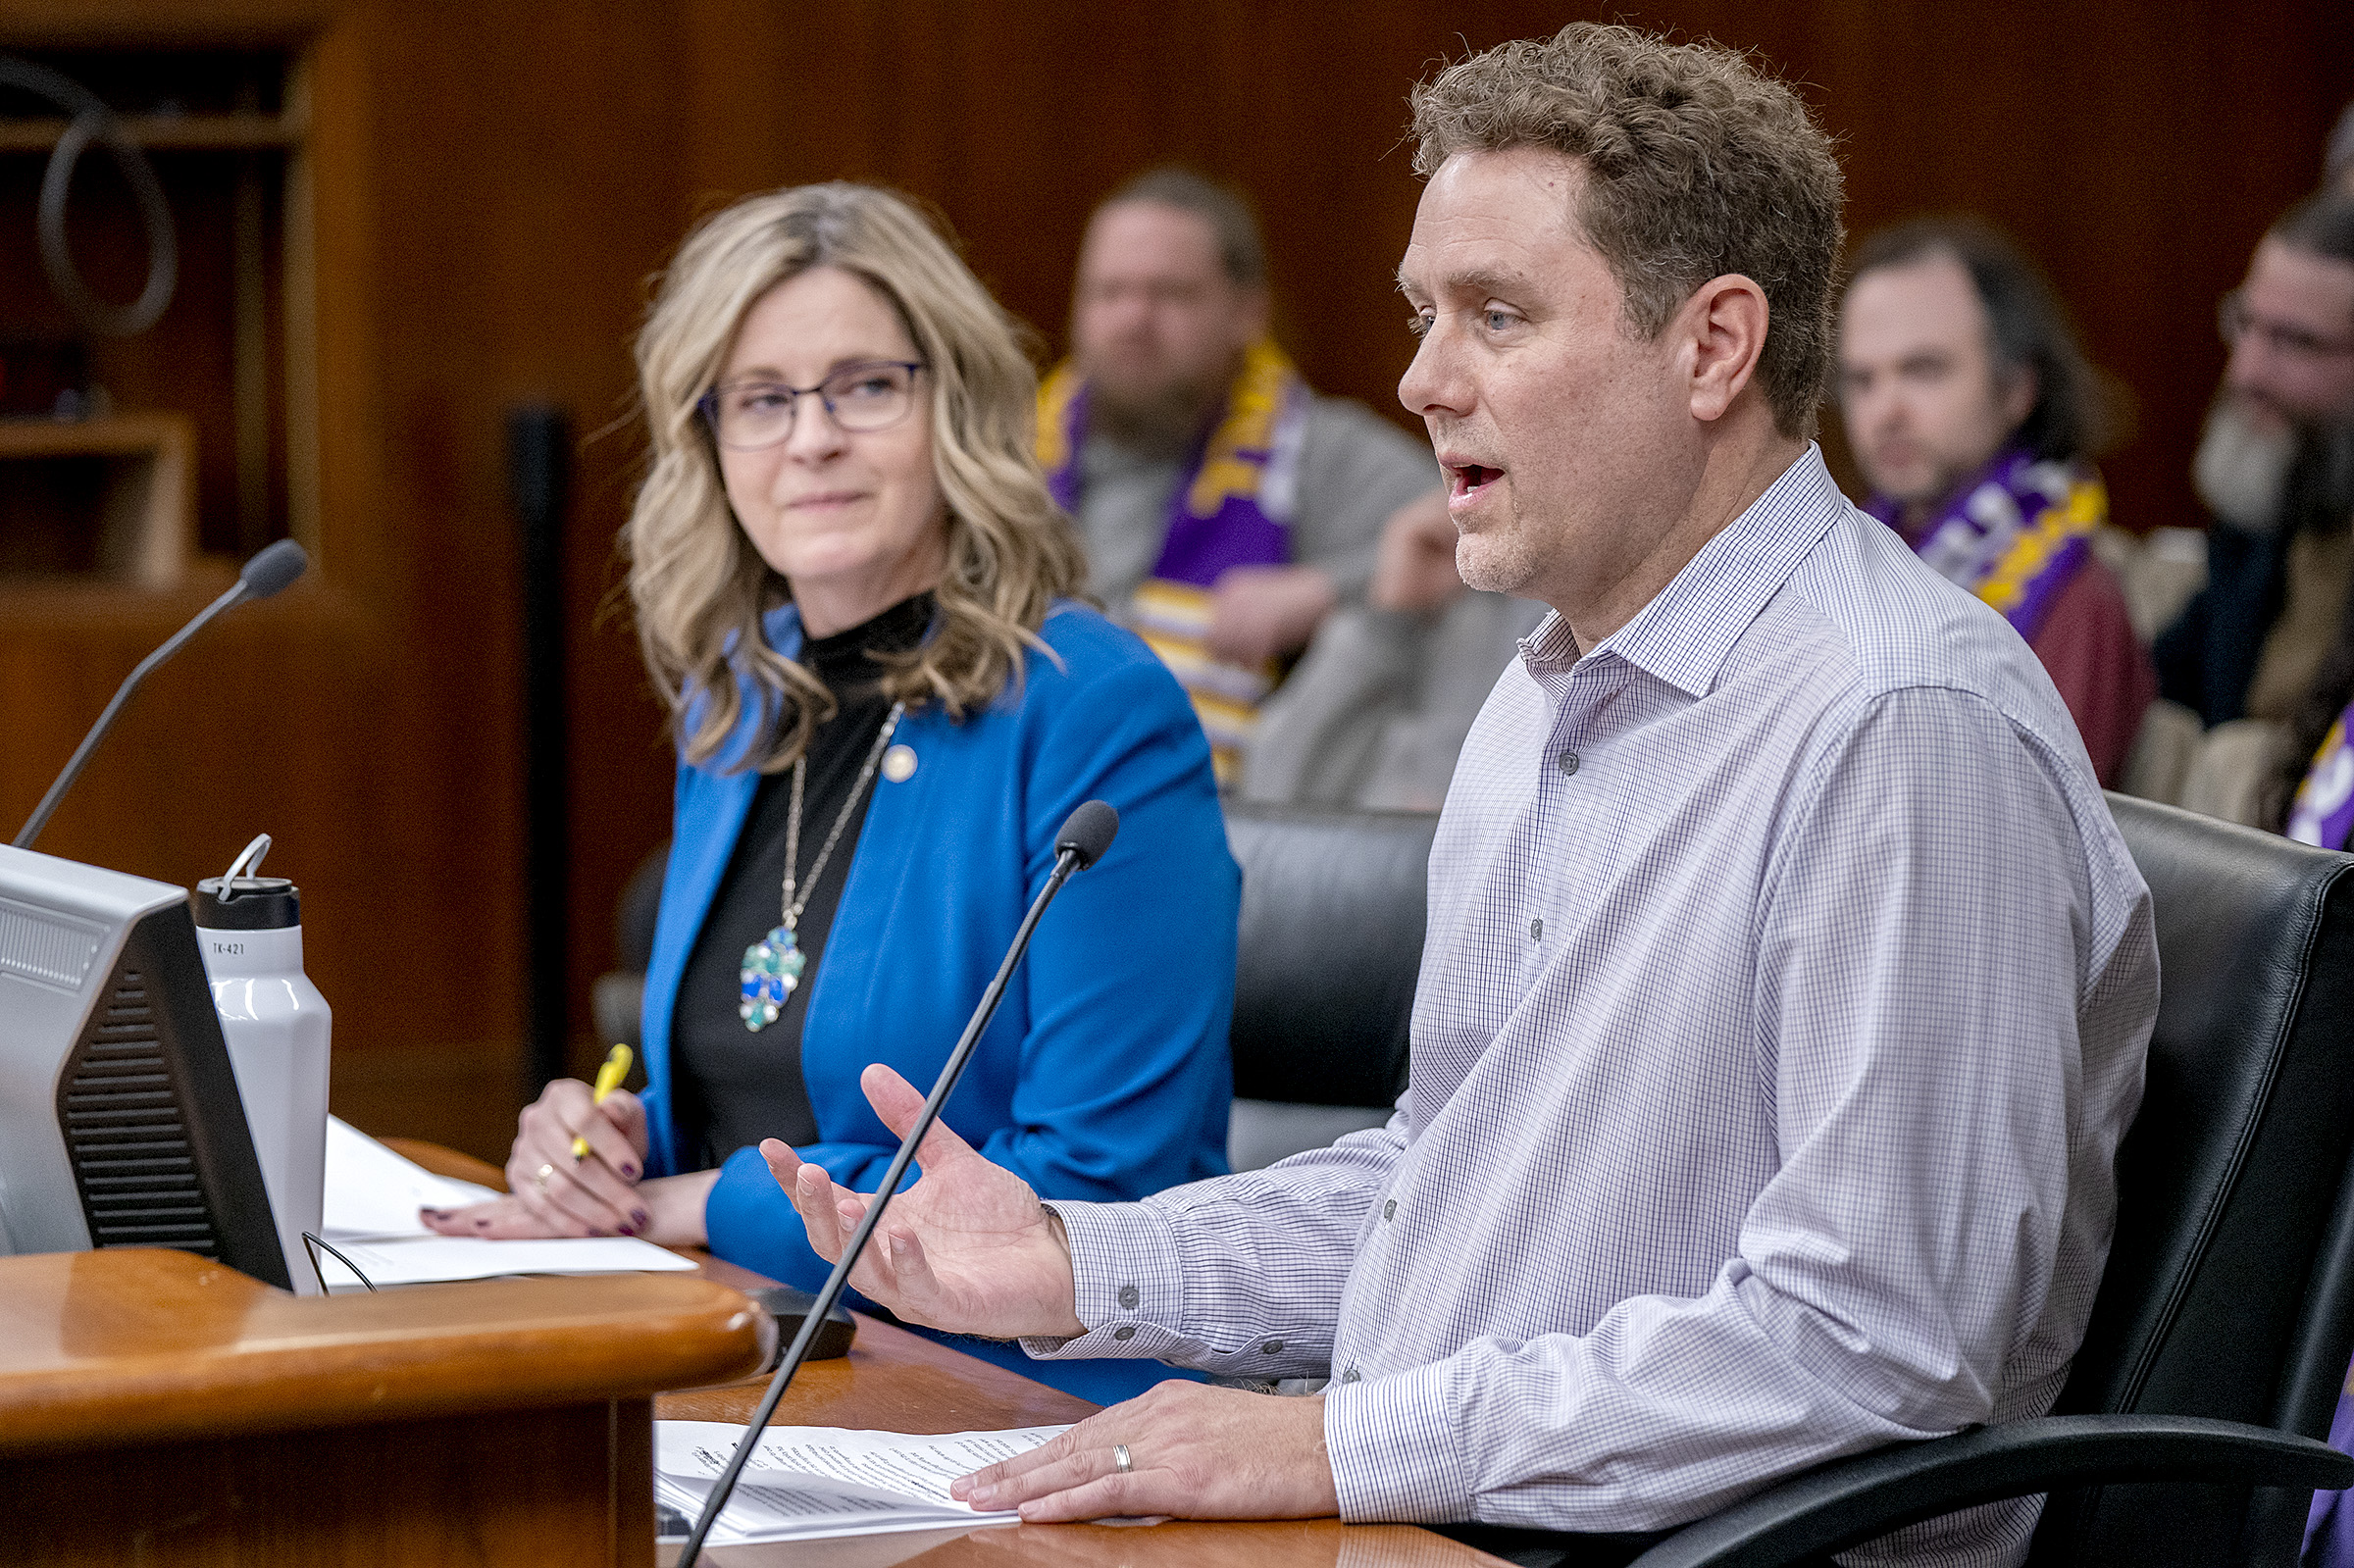 Veyer Logistics General Manager Todd Gaynor testifies before the House Labor and Industry Finance and Policy Committee Thursday on HF3516, sponsored by Rep. Kelly Moller, left. (Photo by Michele Jokinen)